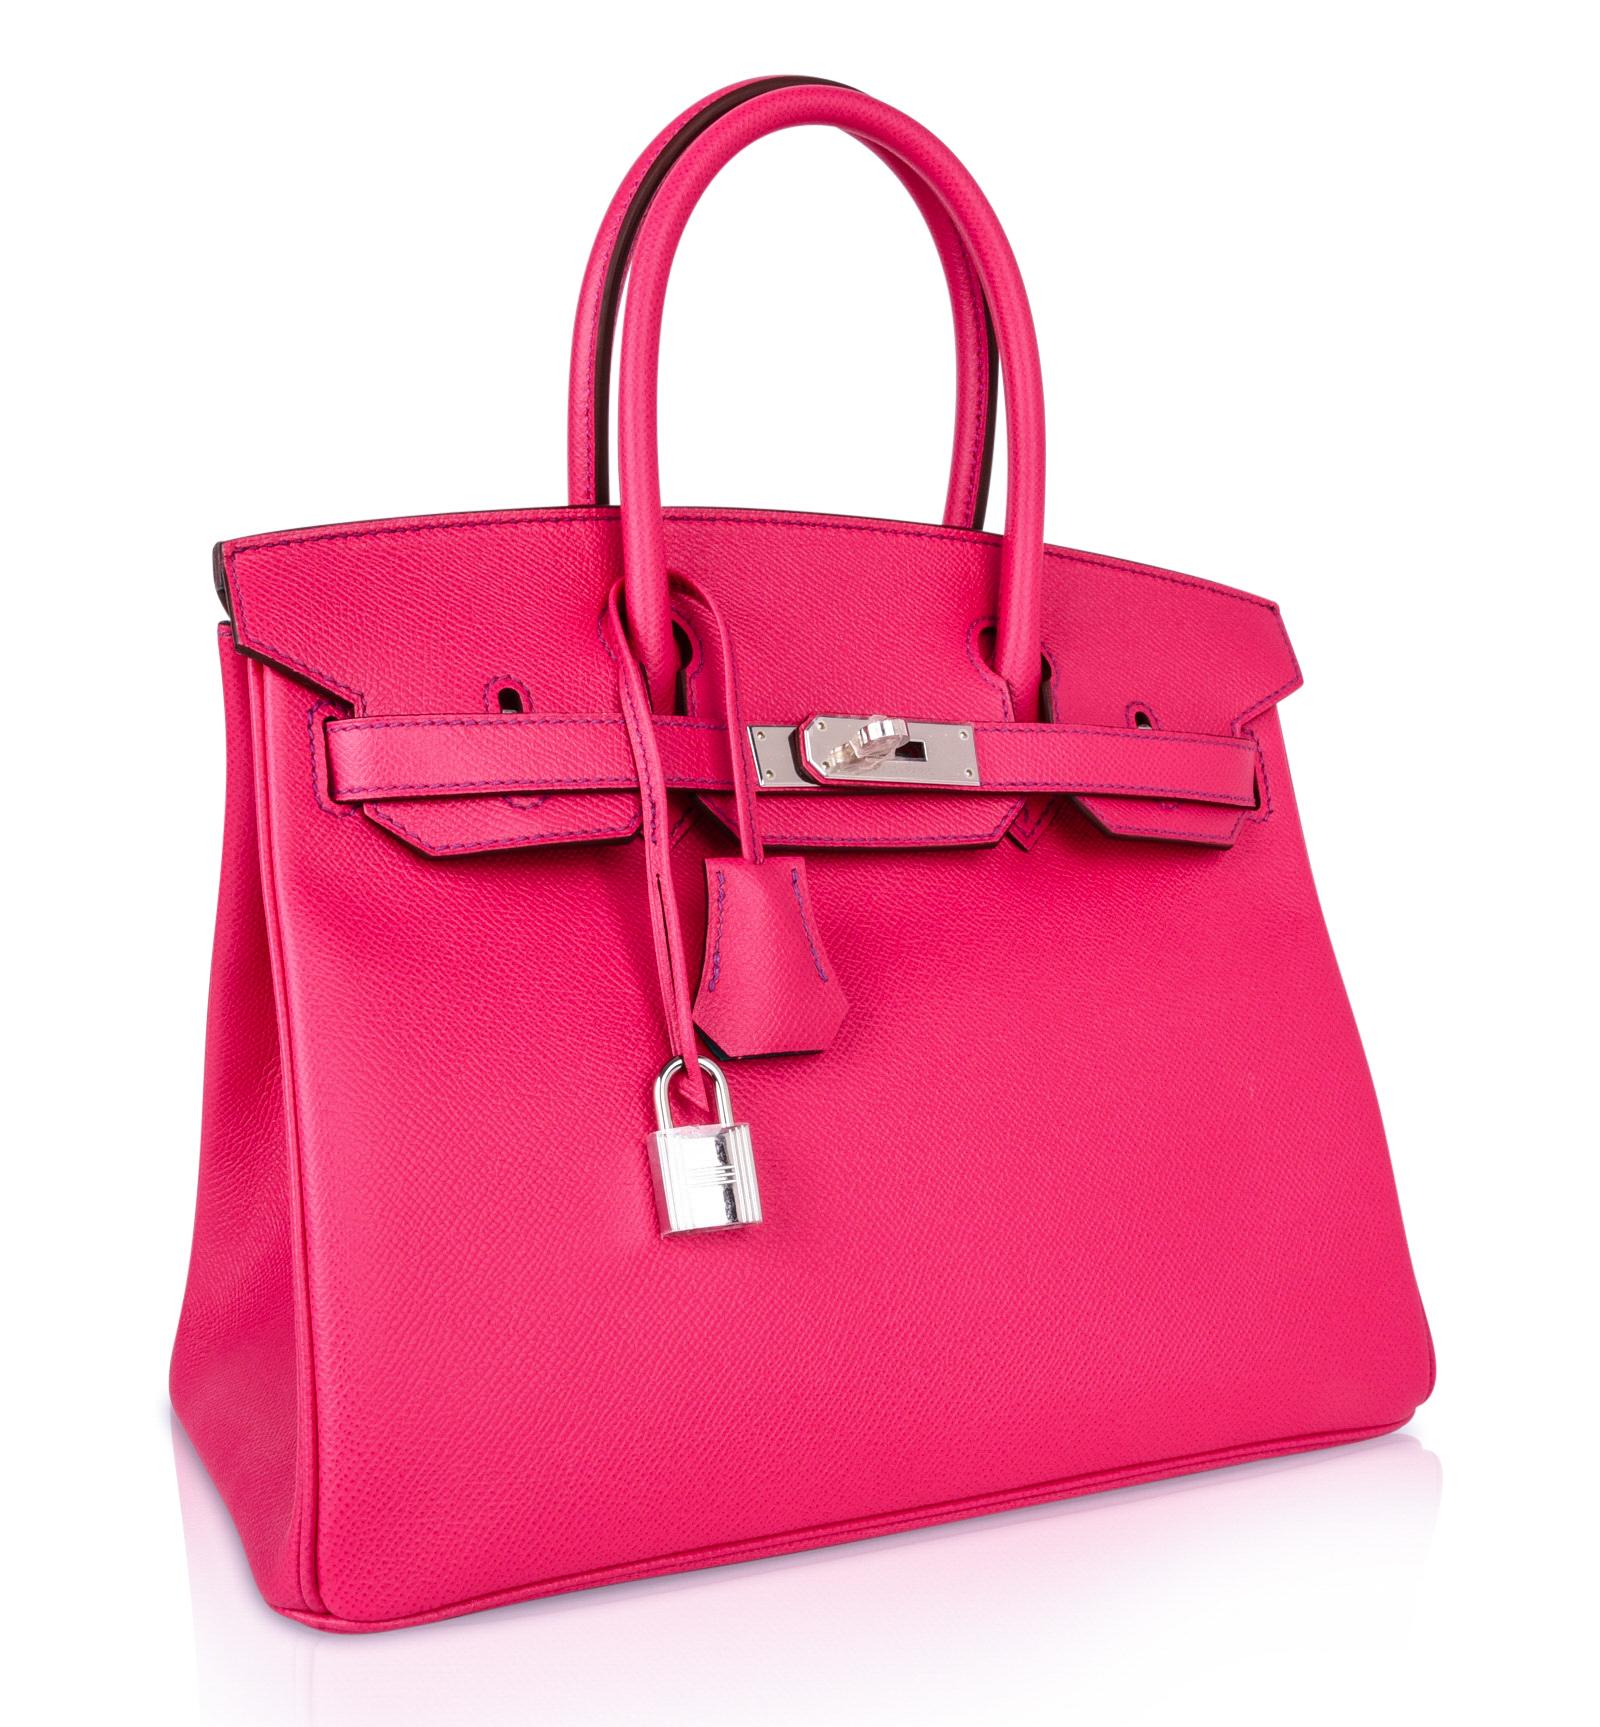 Mightychic offers a rich and bold rare Hermes Birkin HSS 30 bag in coveted Rose Tyrien with Blue Paon interior.
Exquisitely accentuated with purple top stitch.
Fresh with Palladium hardware and Epsom leather.
Comes with the lock and keys in the